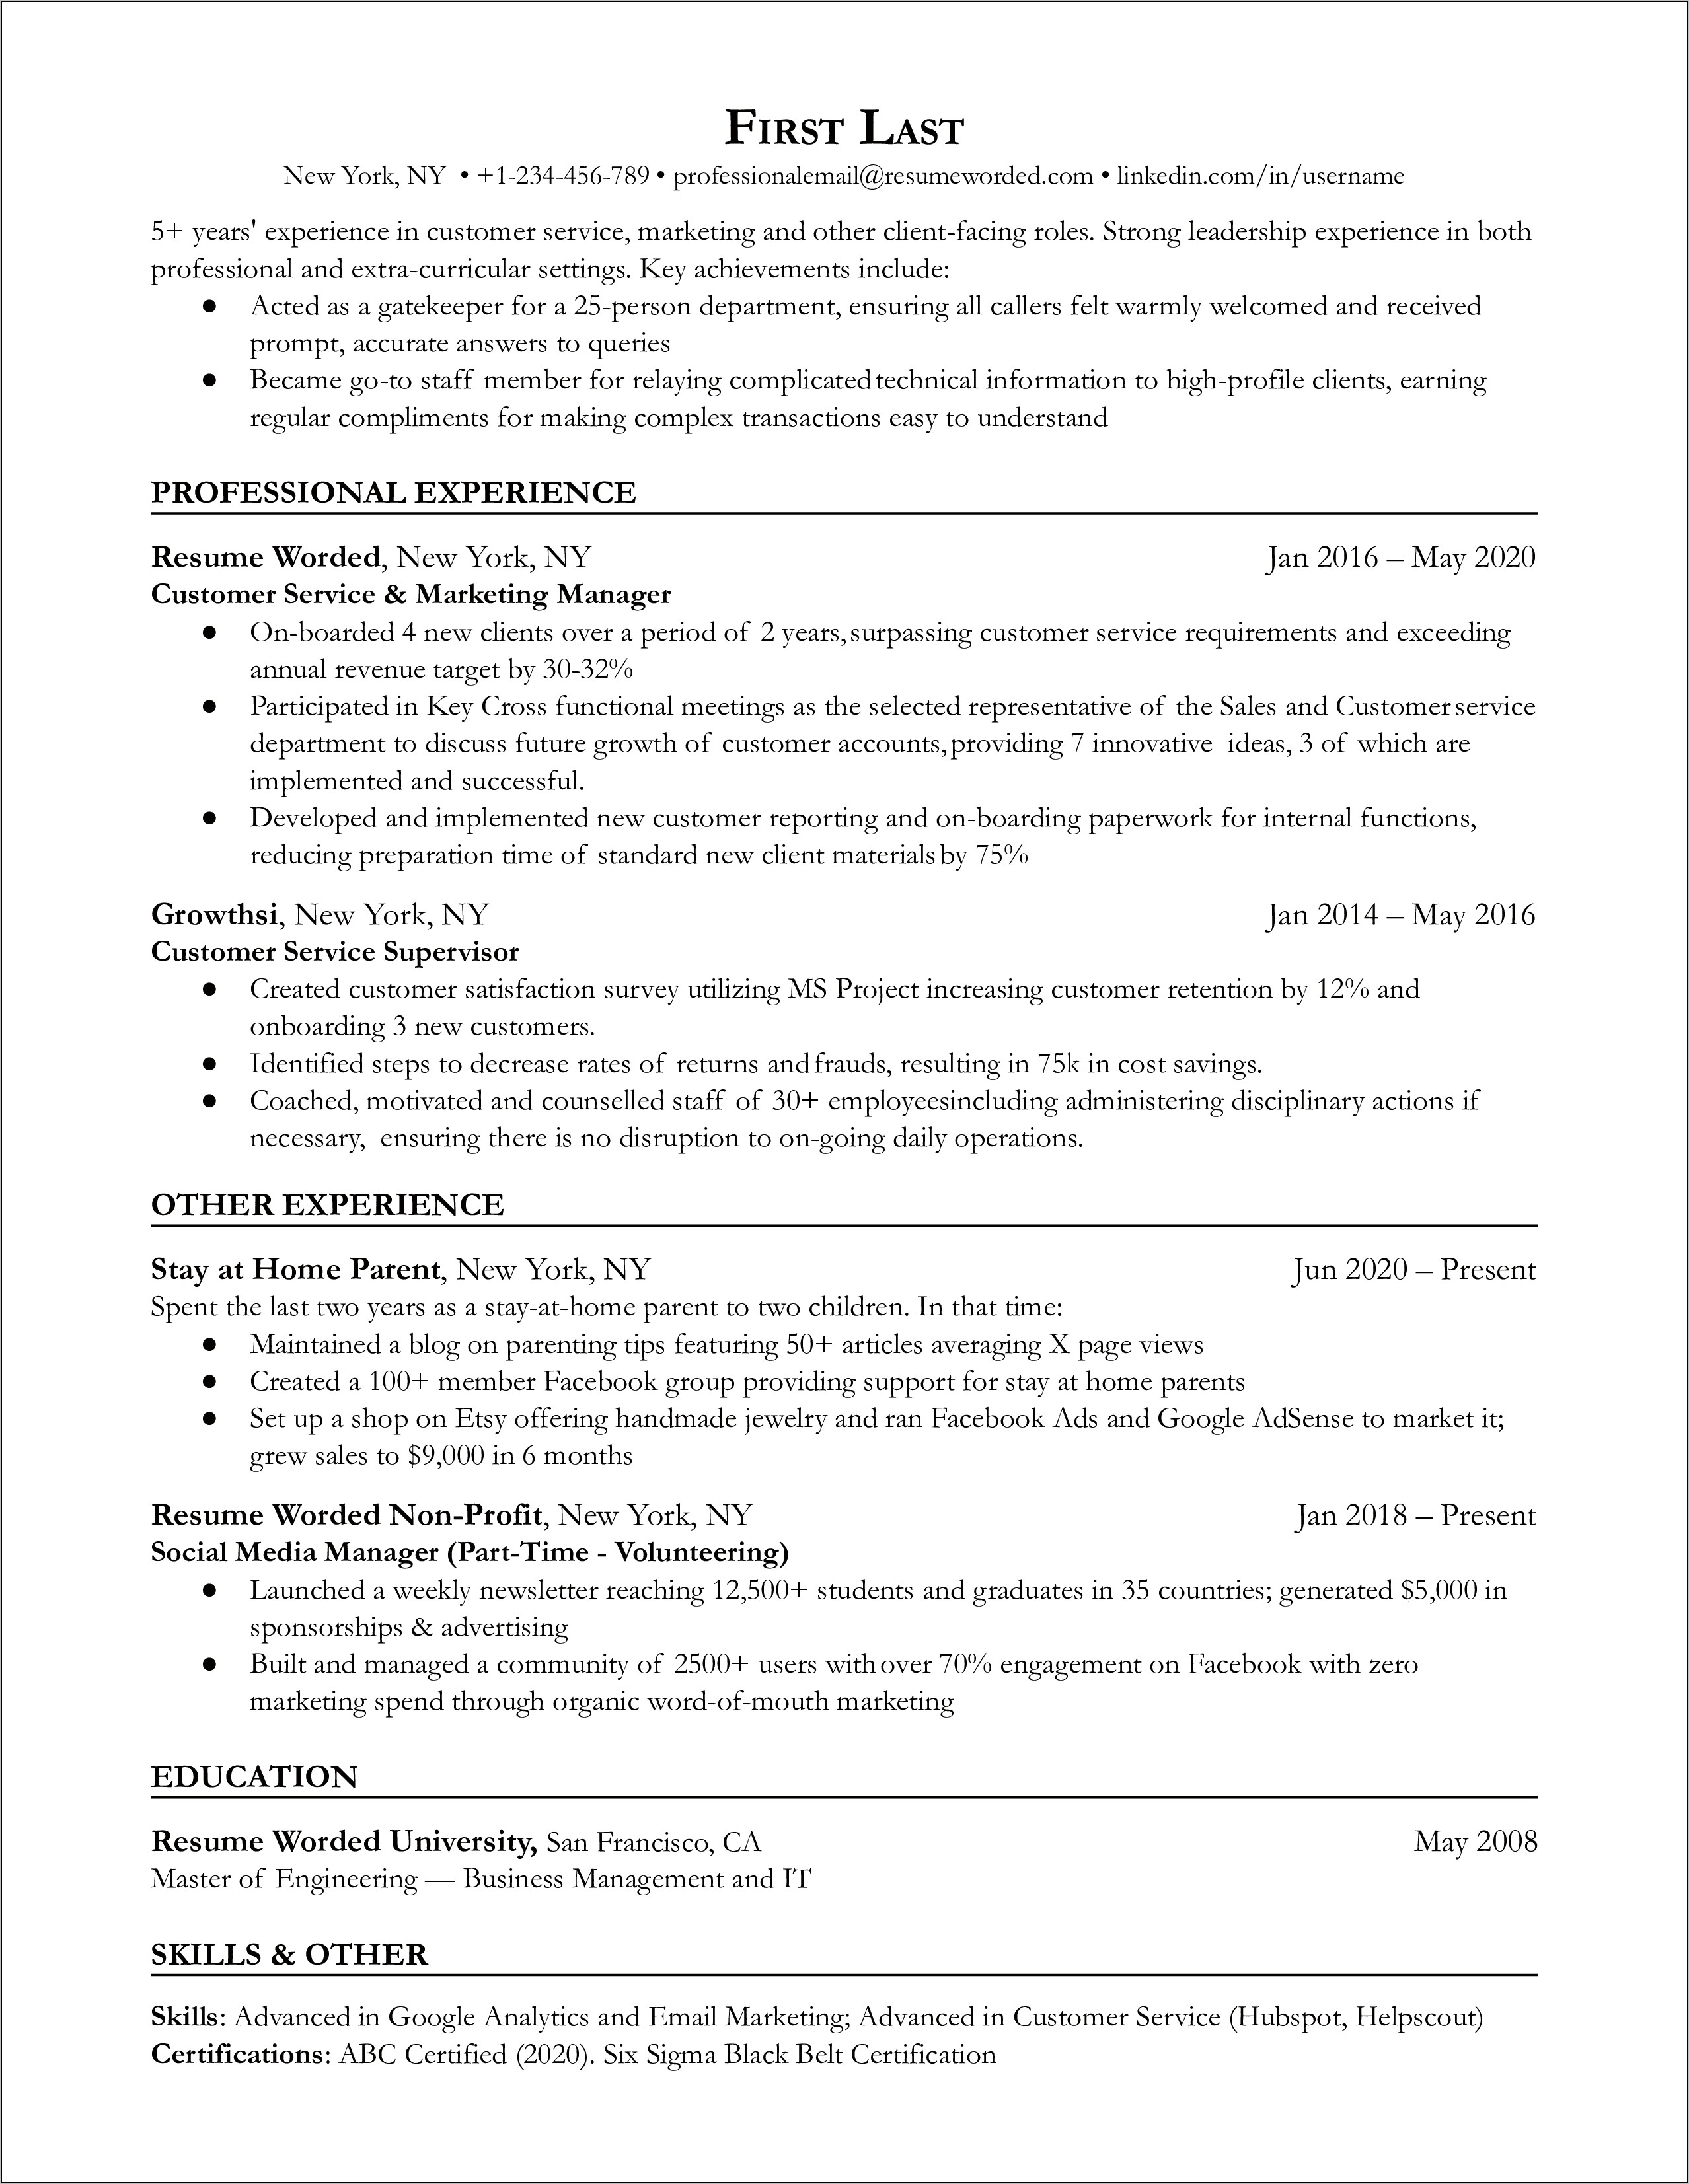 Resume Descriptions Of Stay At Home Parent